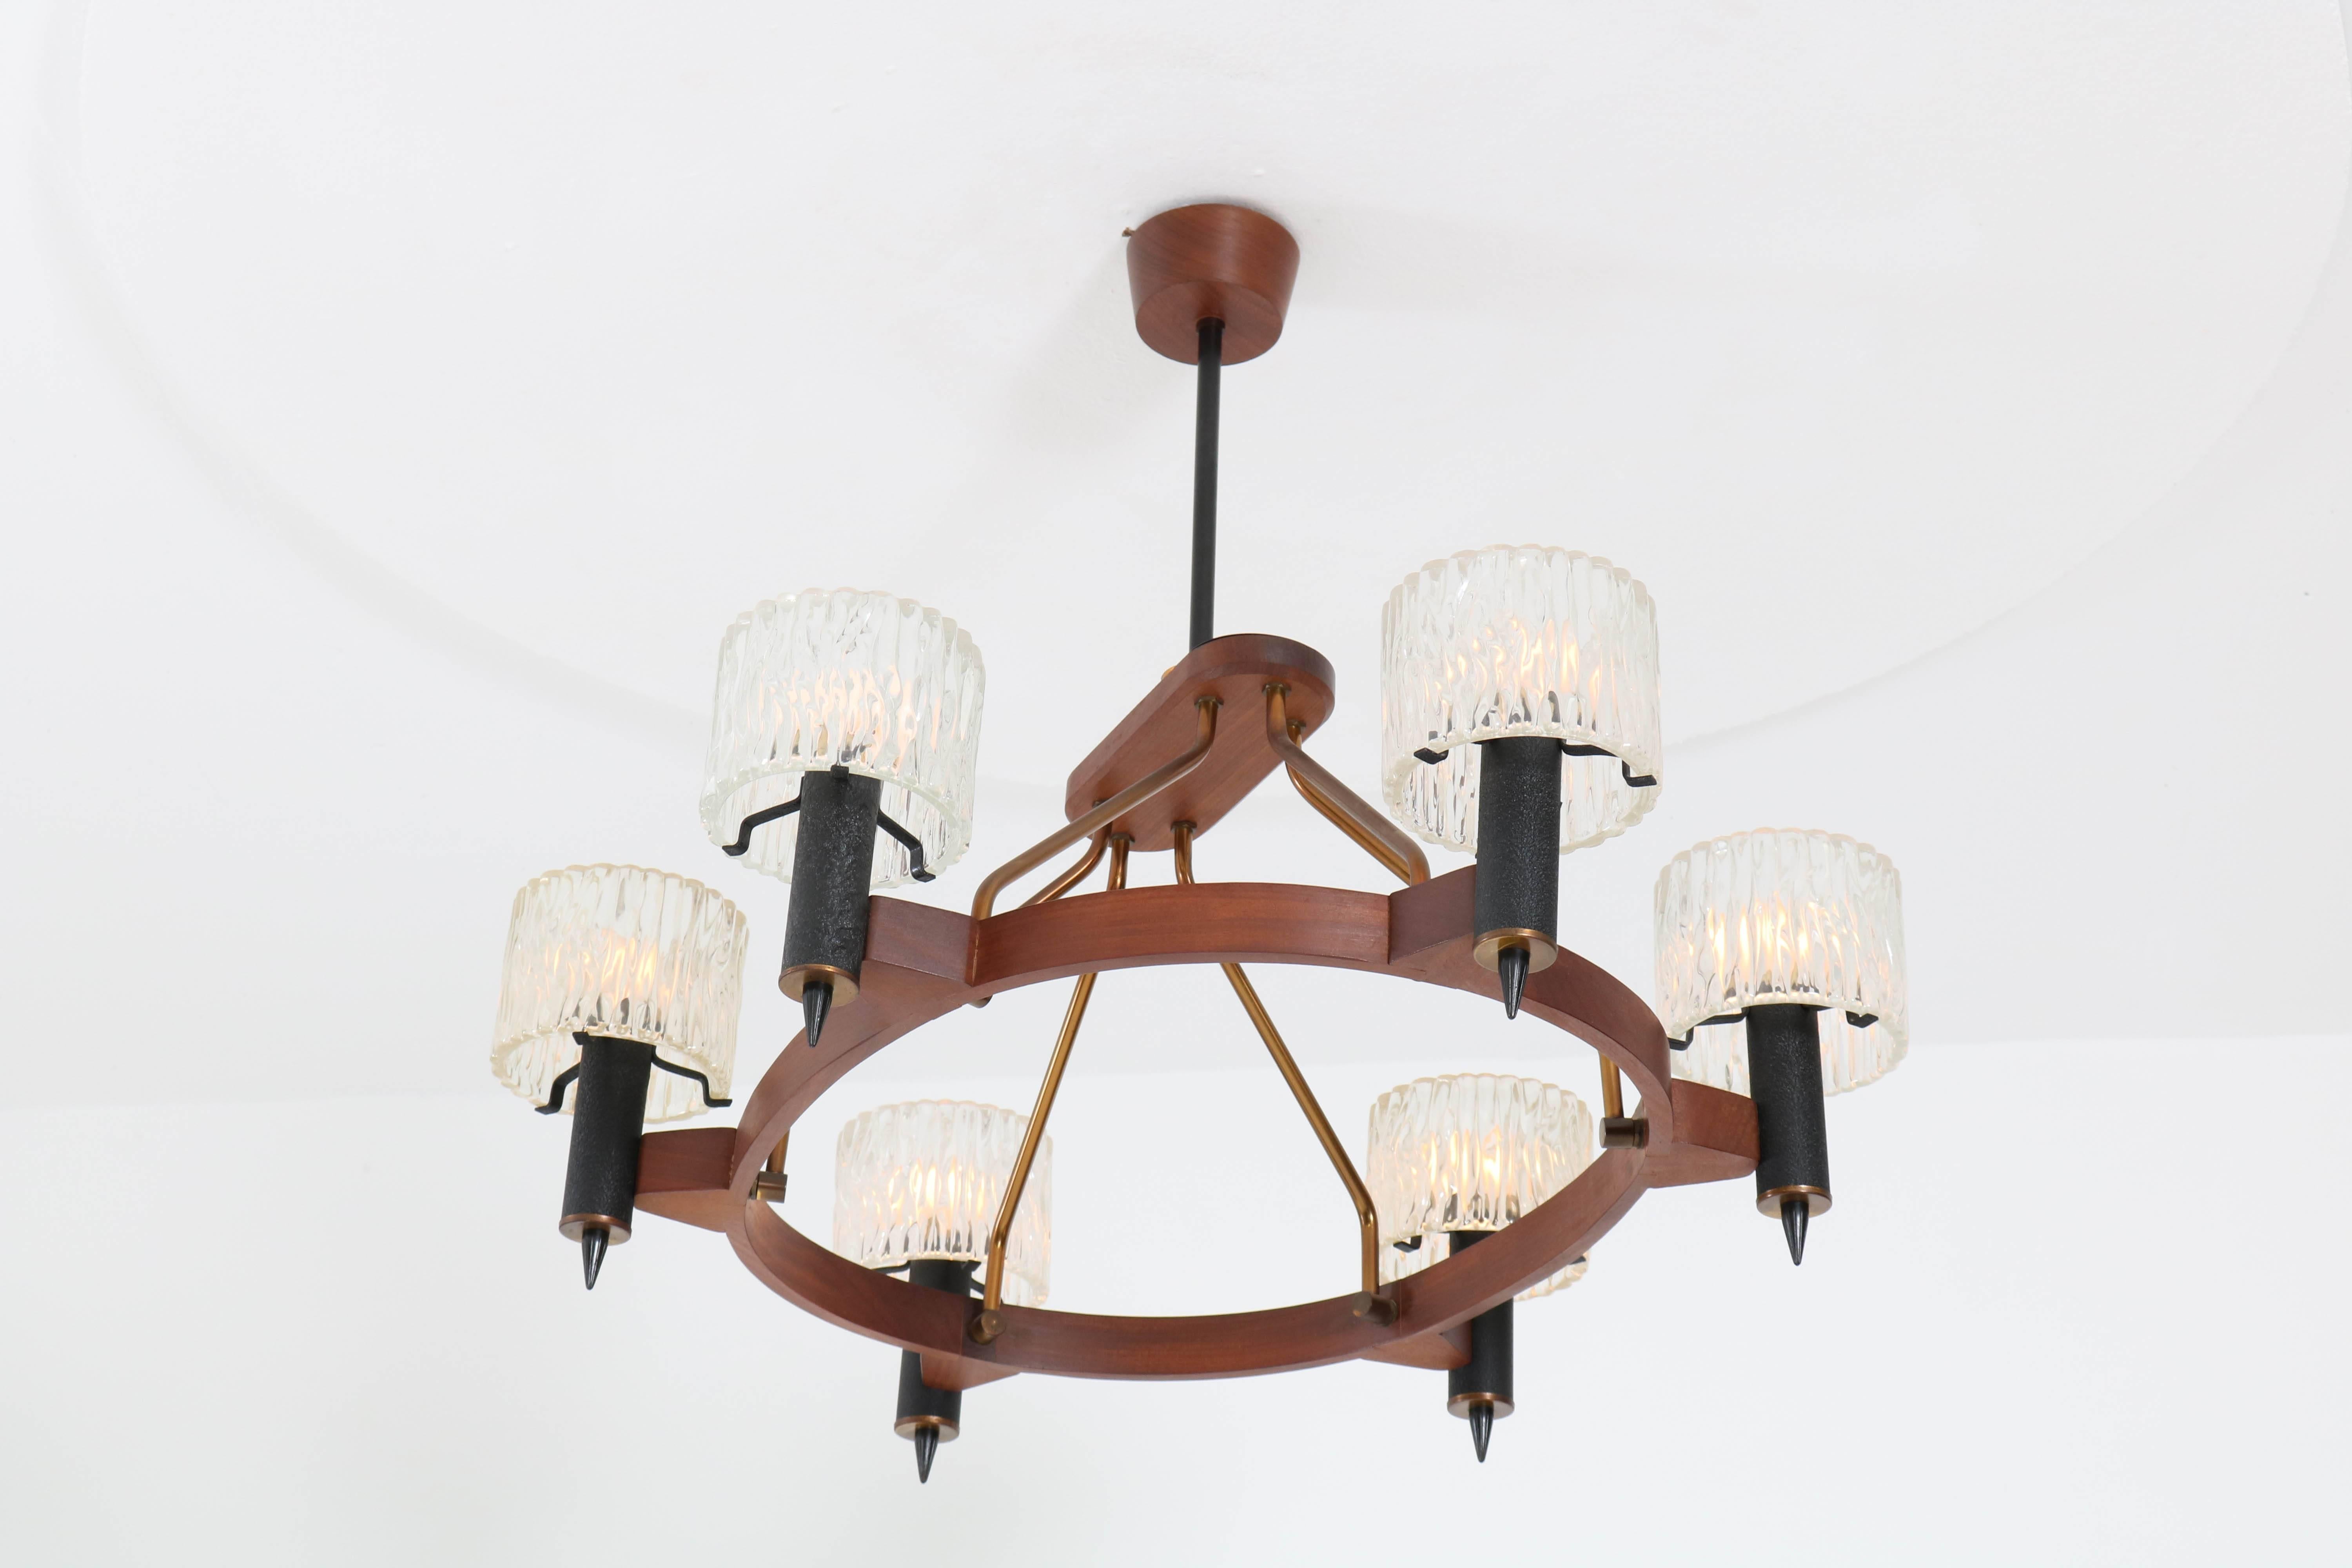 Rare Mid-Century Modern oval chandelier by Carl Fagerlund for Orrefors Sweden, 1950s.
Teak, black lacquered metal and brass frame with six original pressed and frosted glass shades.
In good original condition with minor wear consistent with age